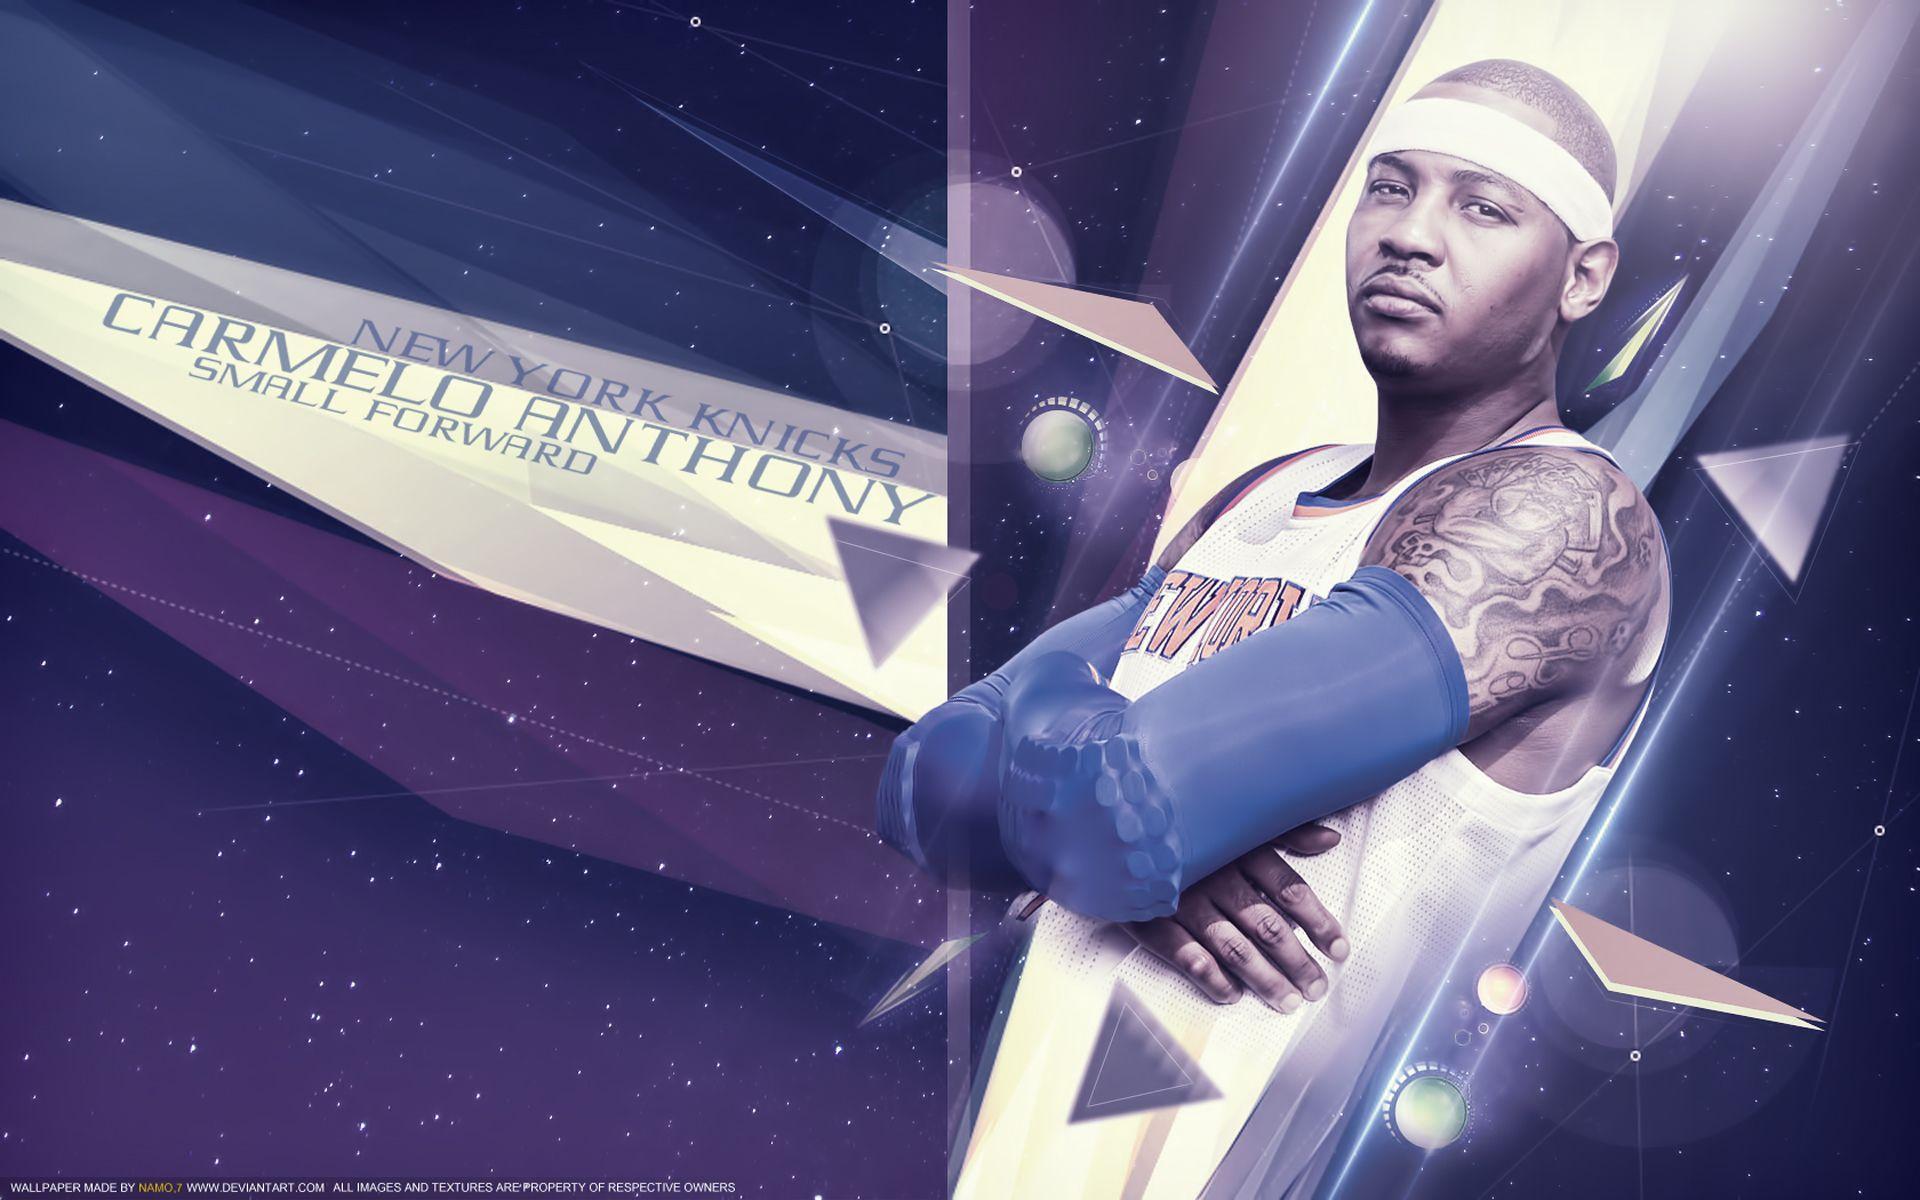 Carmelo Anthony Up Wallpaper